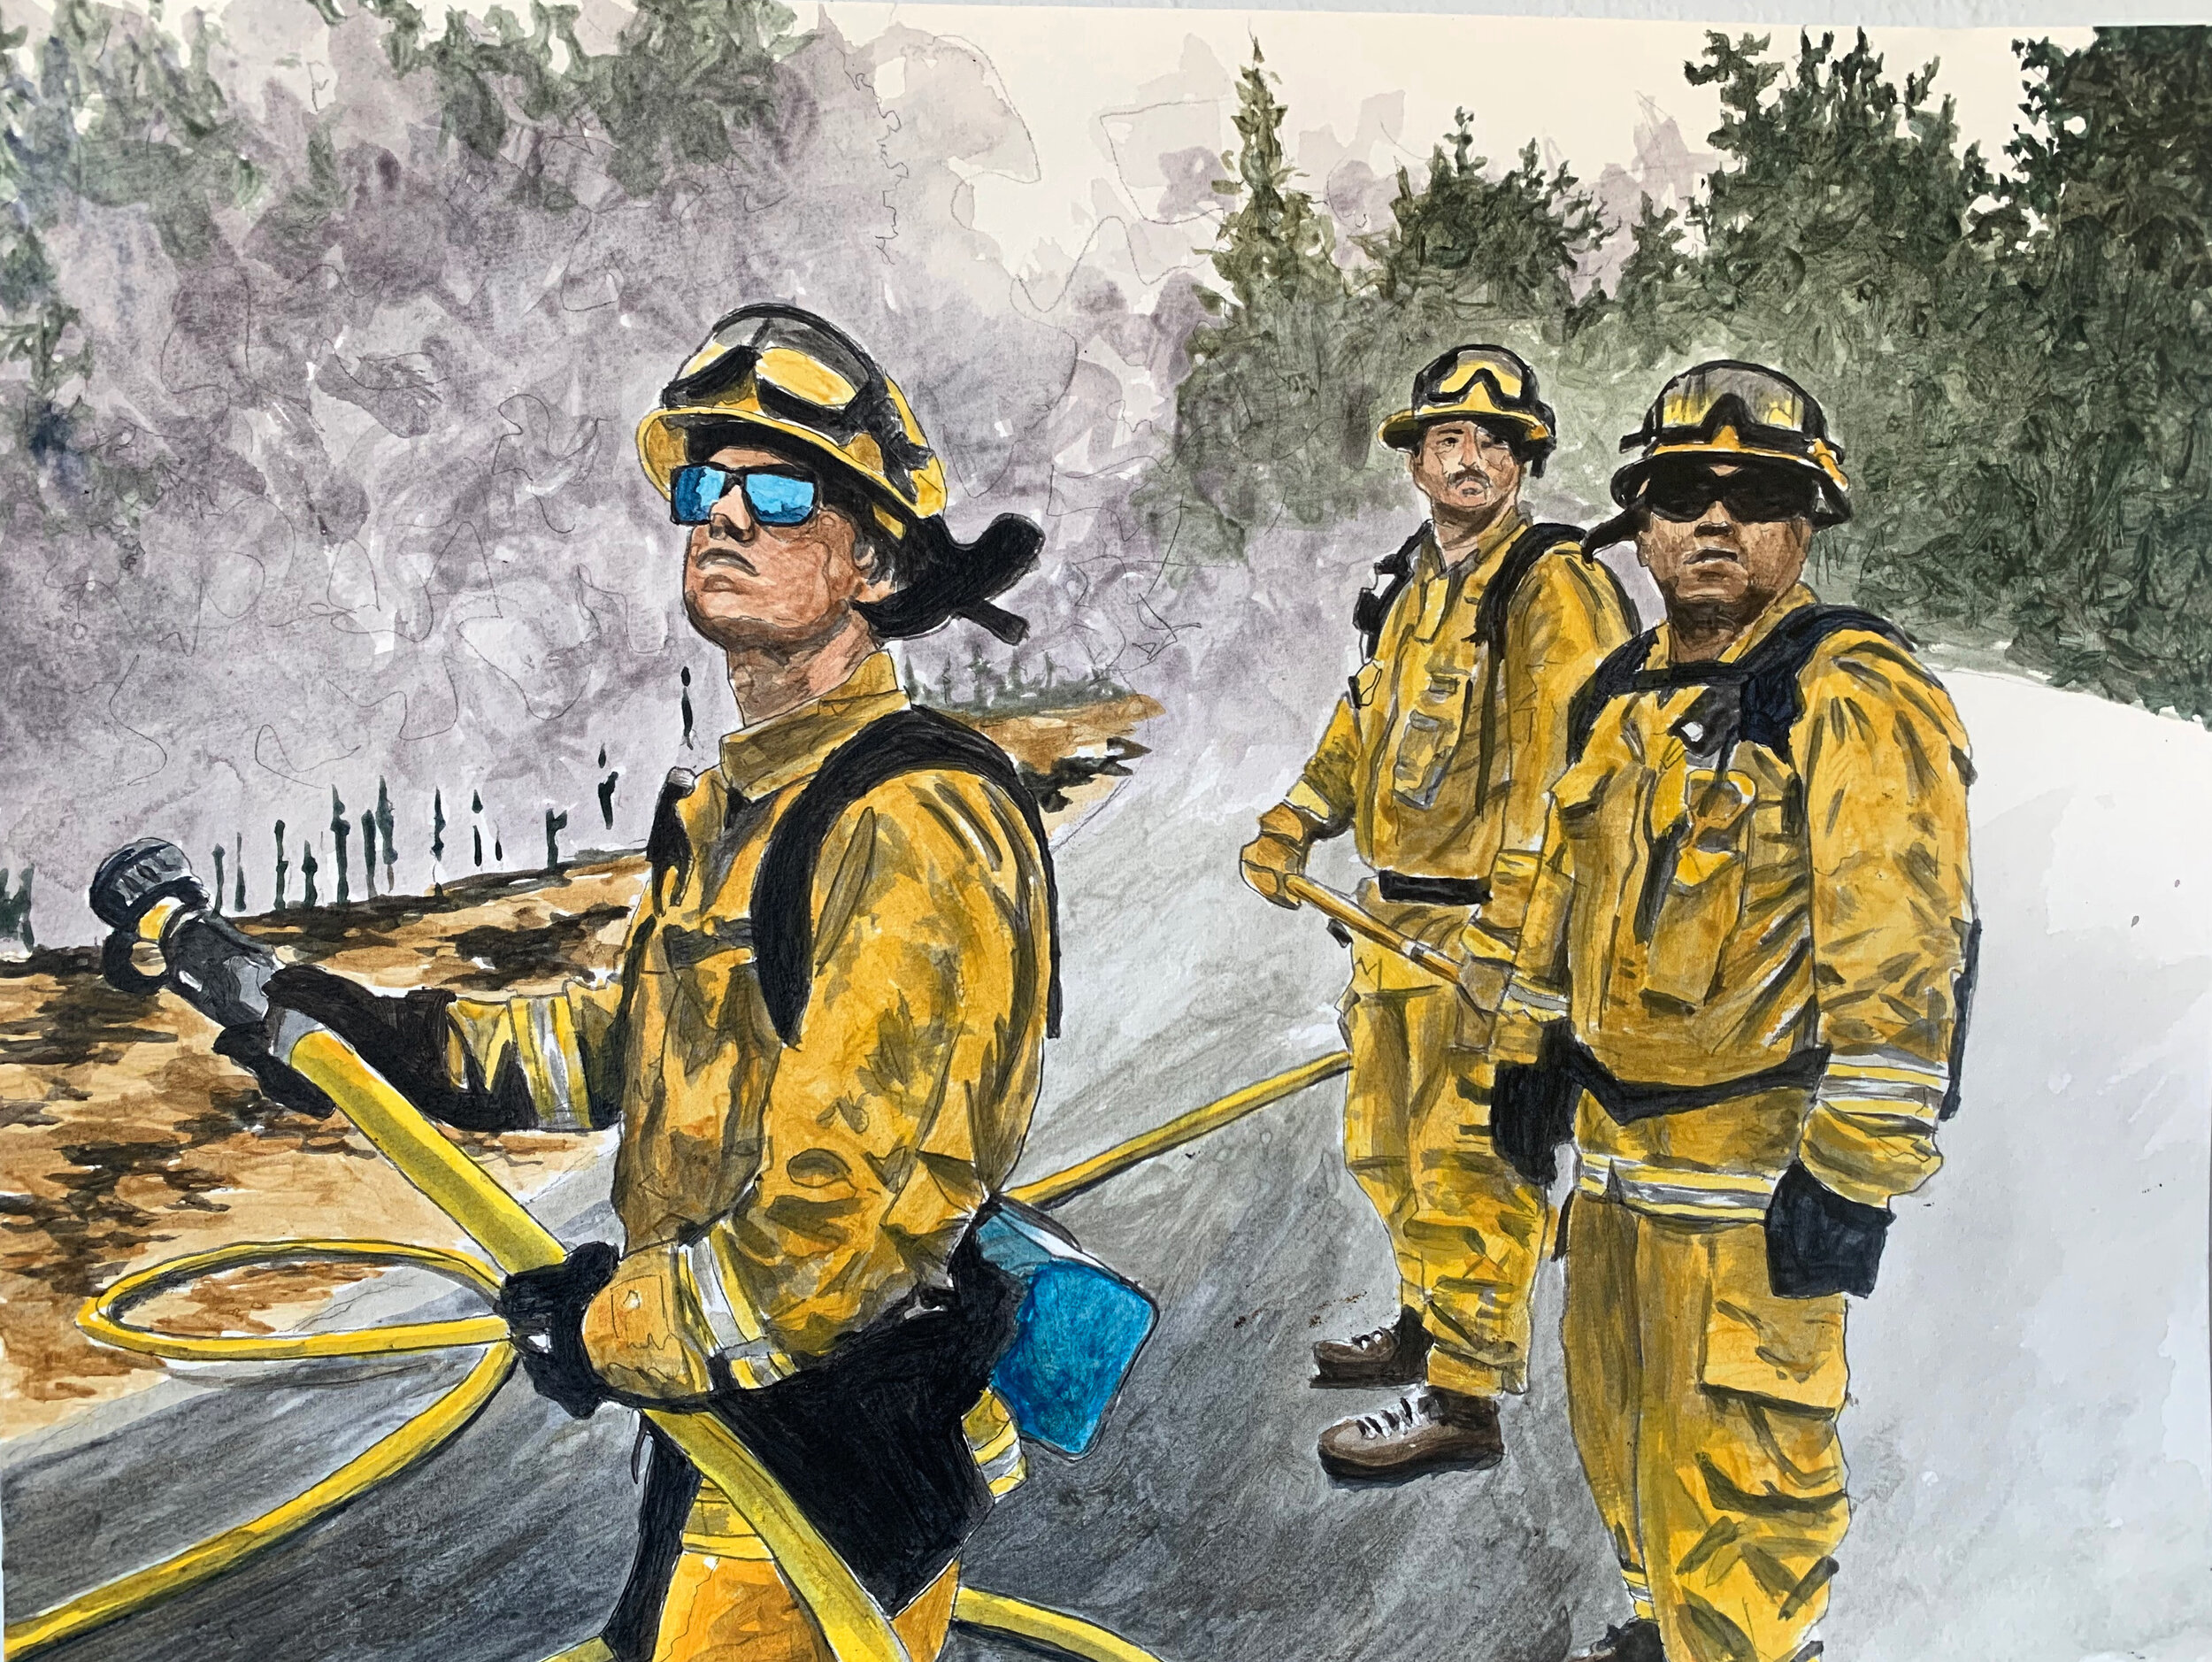 Untitled, Firefighters 3, 2020, acrylic on paper, 12 x 16 inches